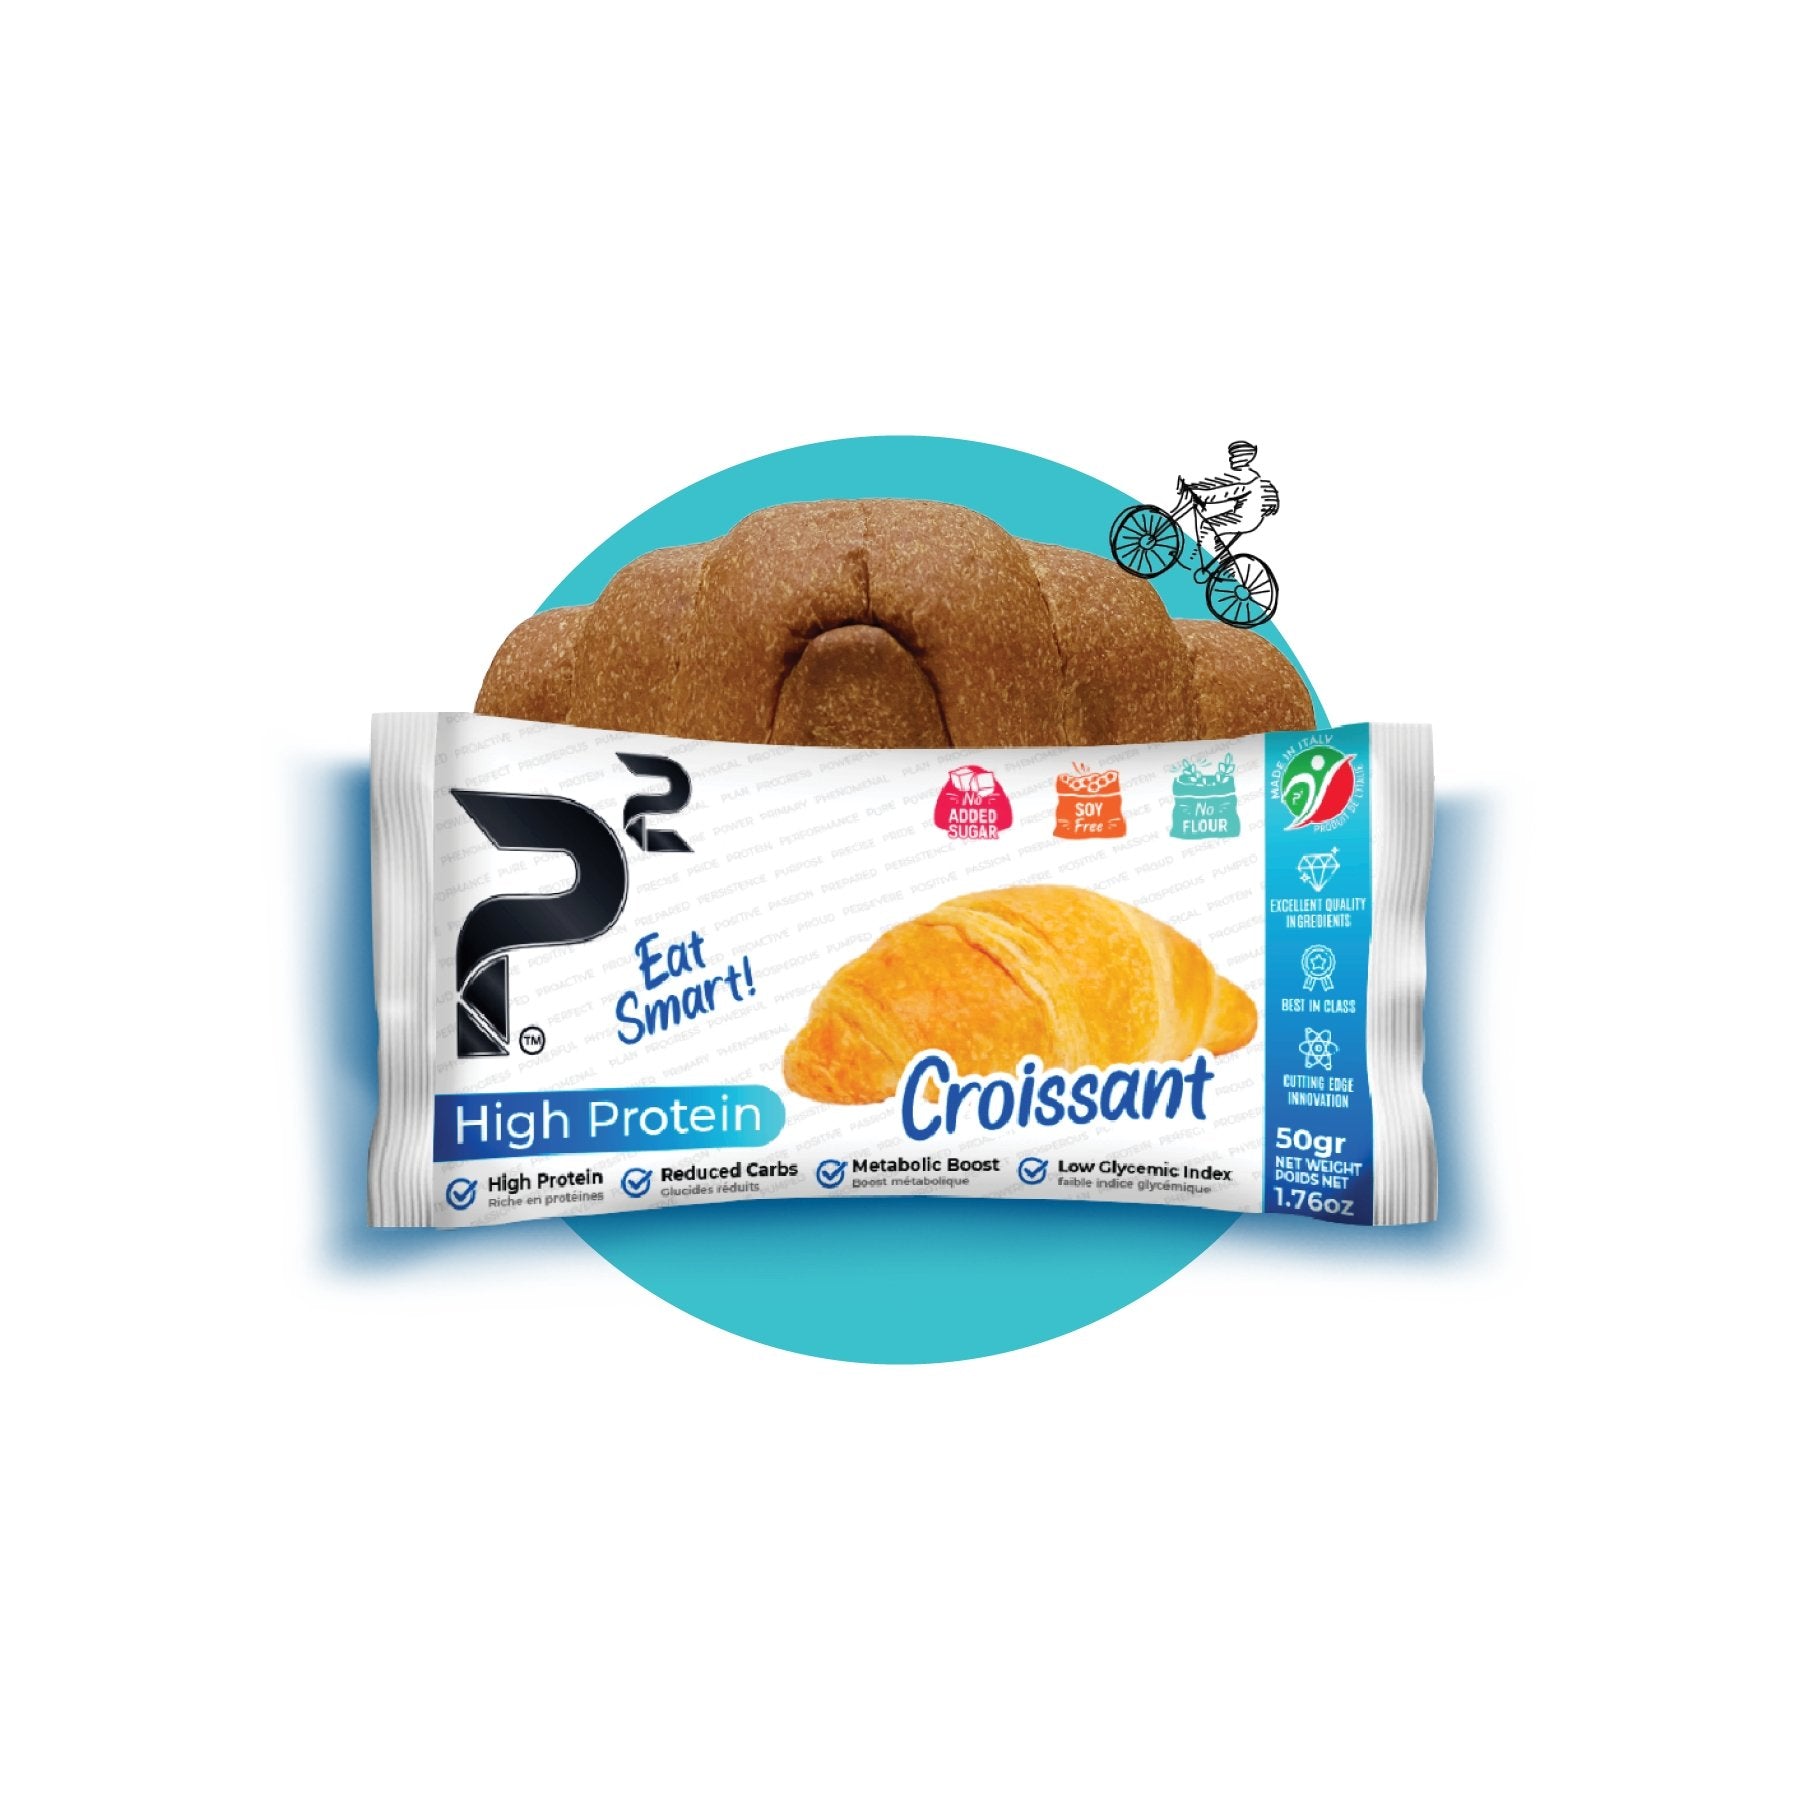 High Protein Croissant. 25g protein and 0g net carbs per 100g. No added sugar, Soy free, No flour.